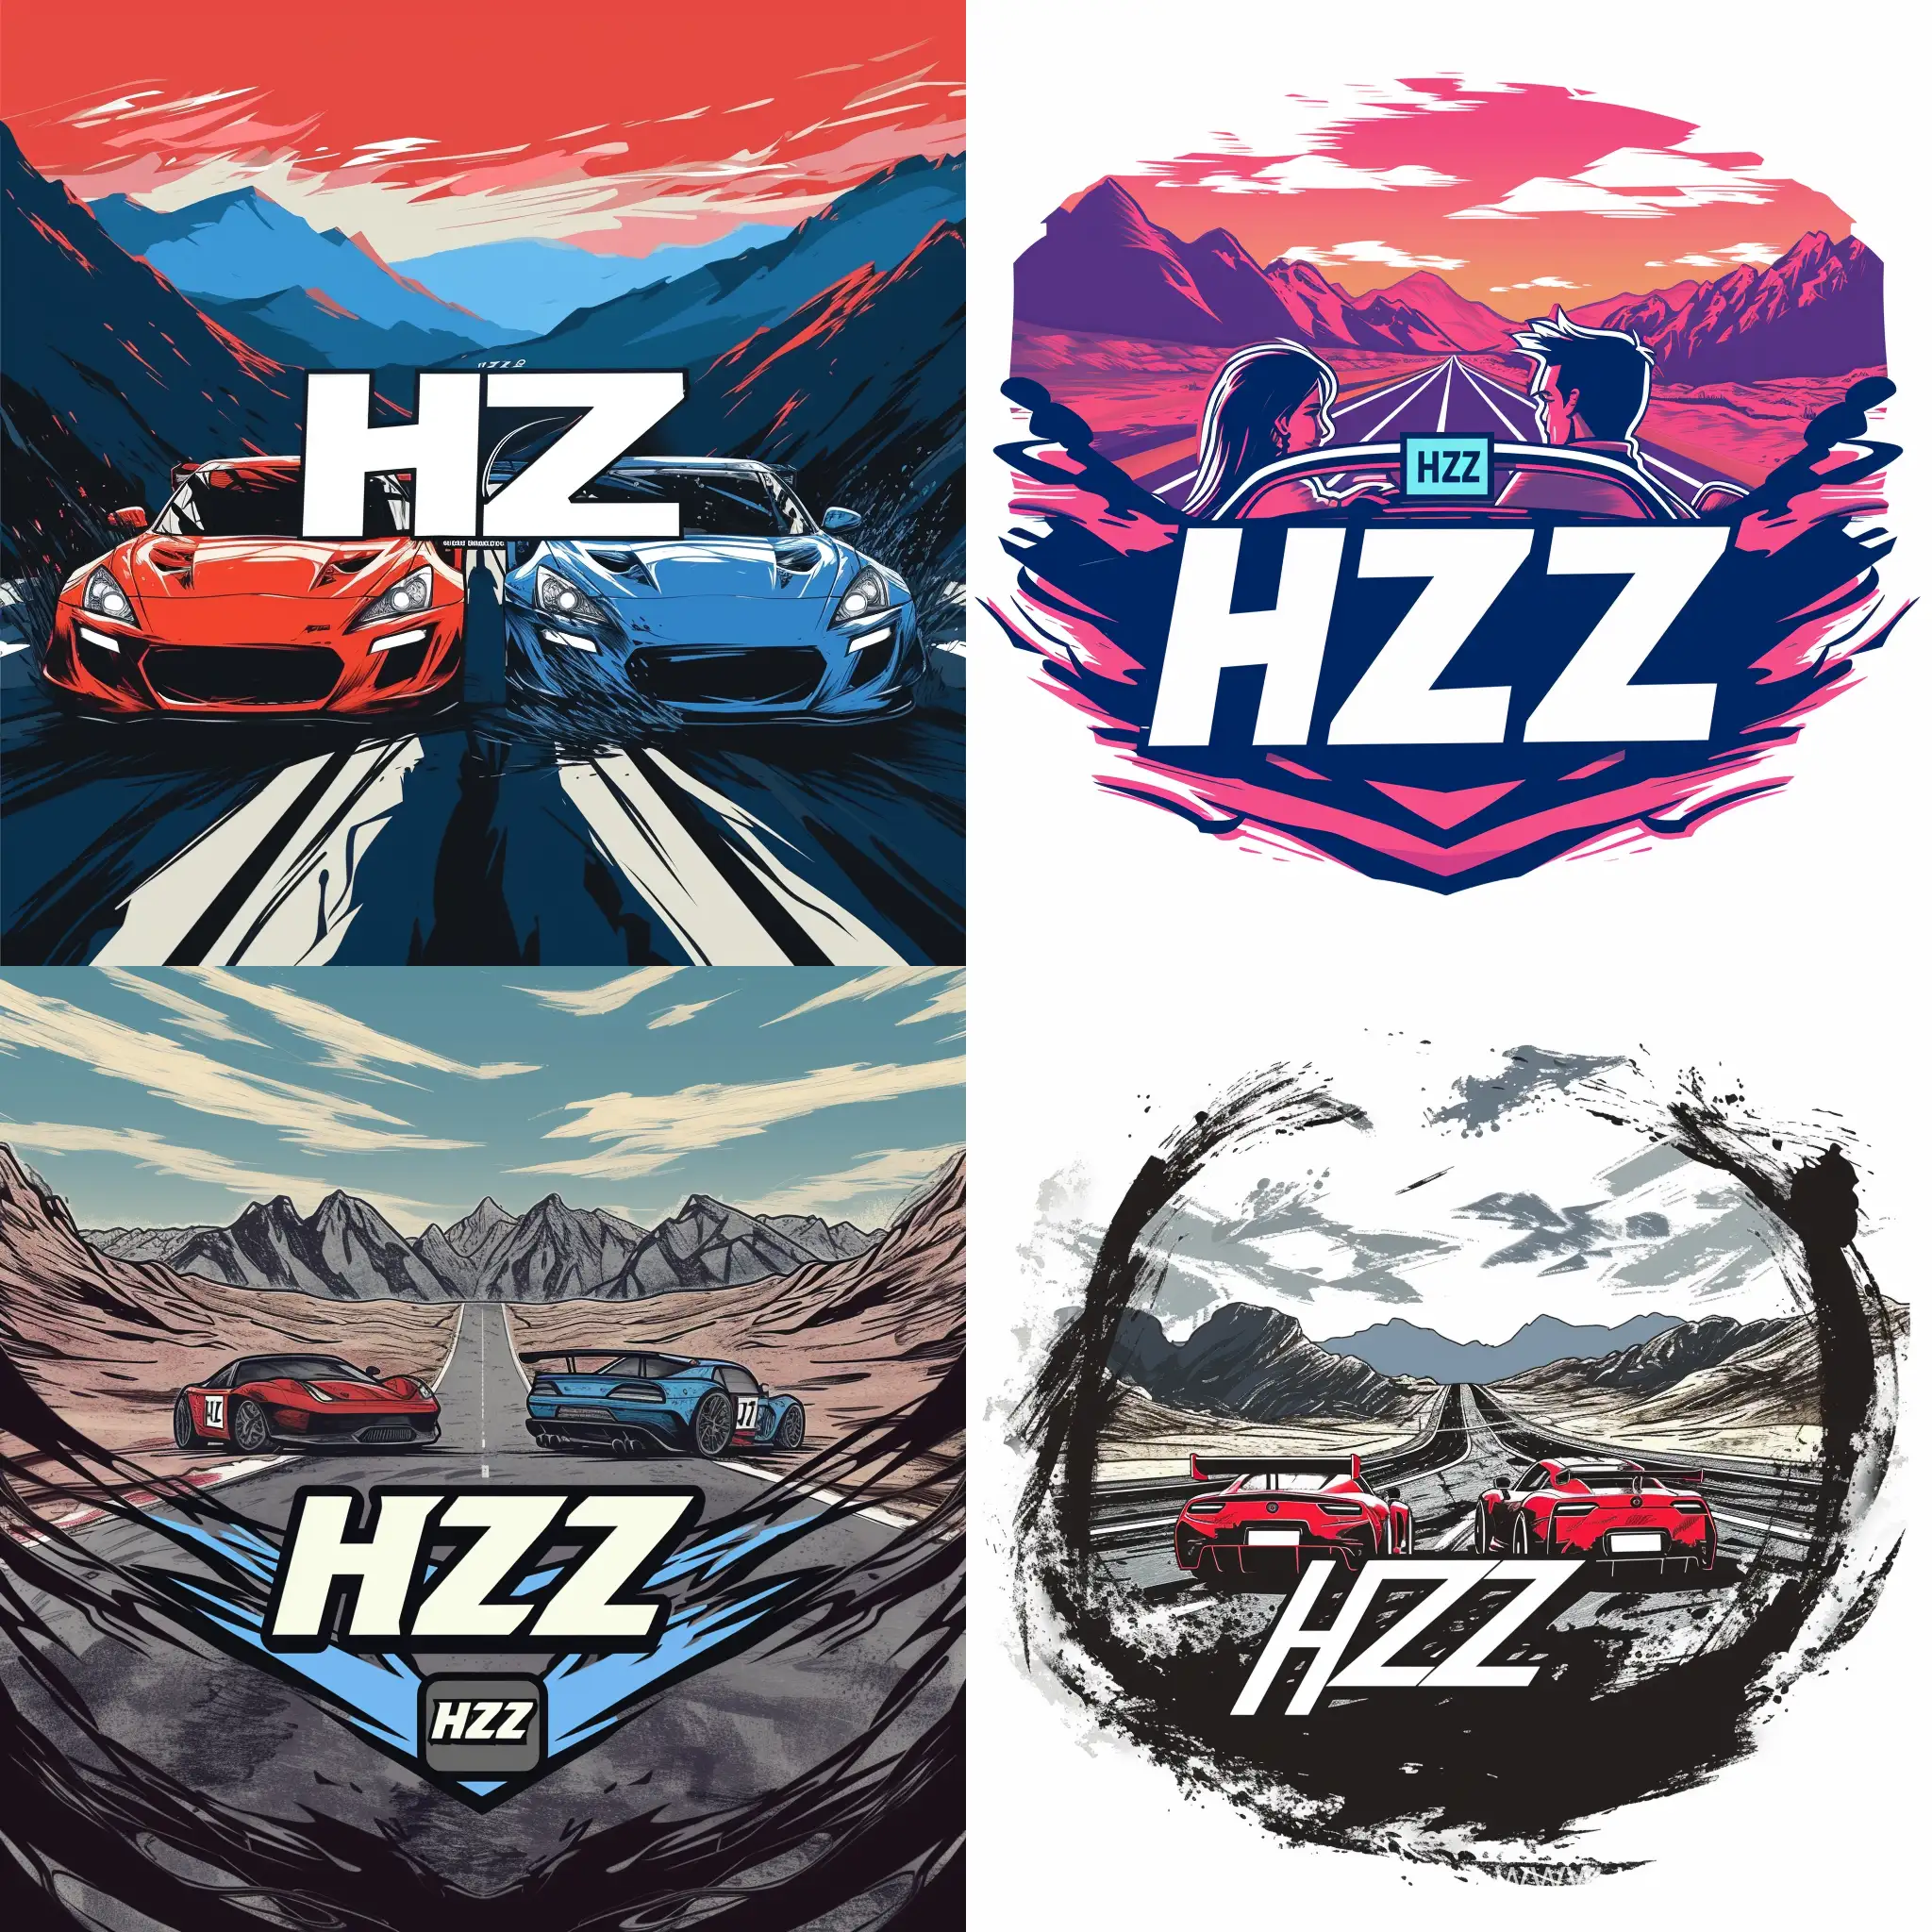 draw style car race logo, couple racing cours,
with HZZ tag in middle, mountains with road in backround